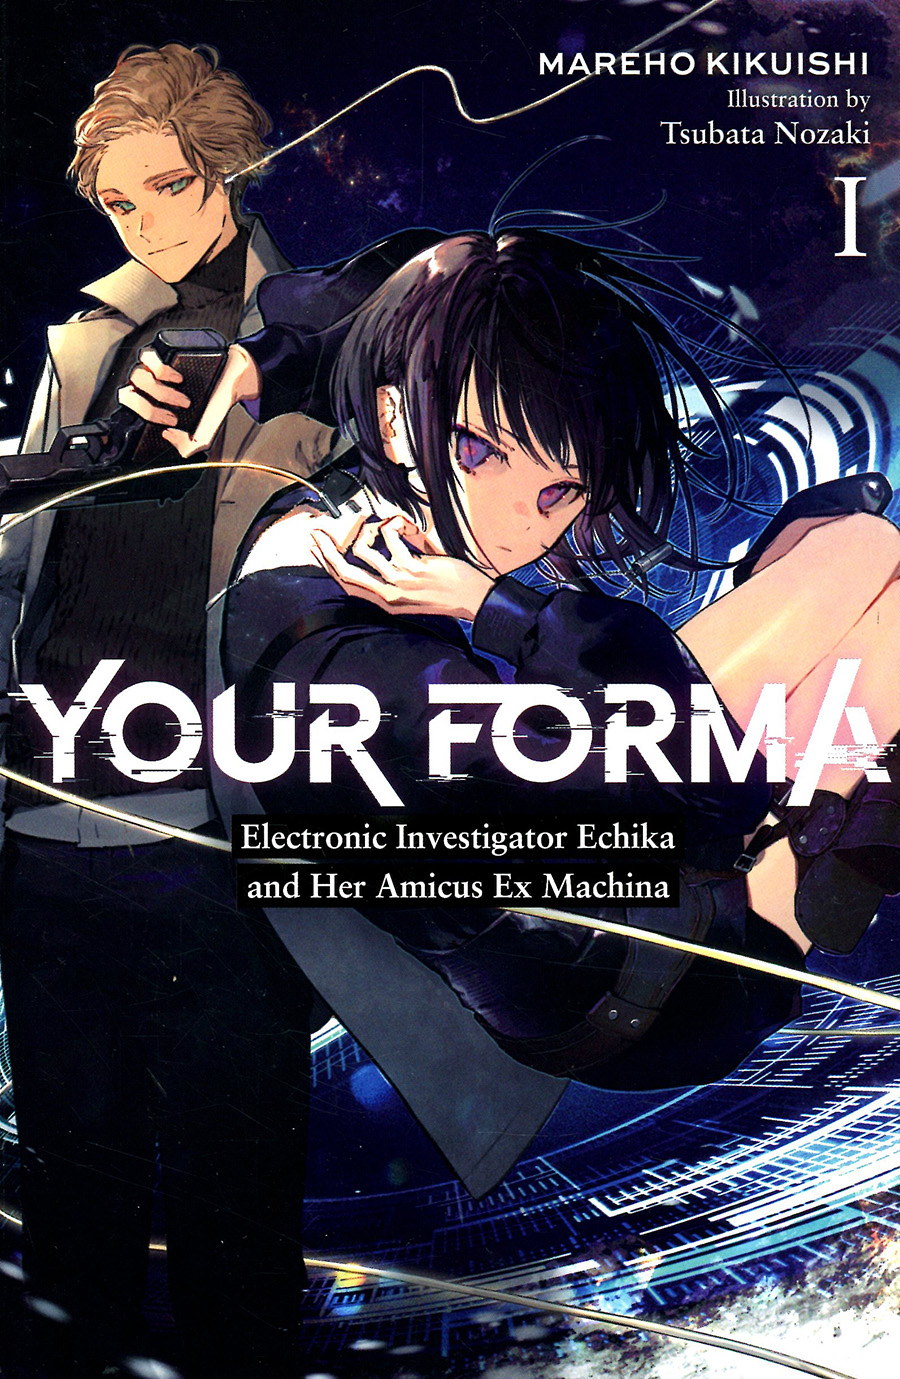 Your Forma Light Novel Vol 1 Electronic Investigator Echika And Her Amicus Ex Machina